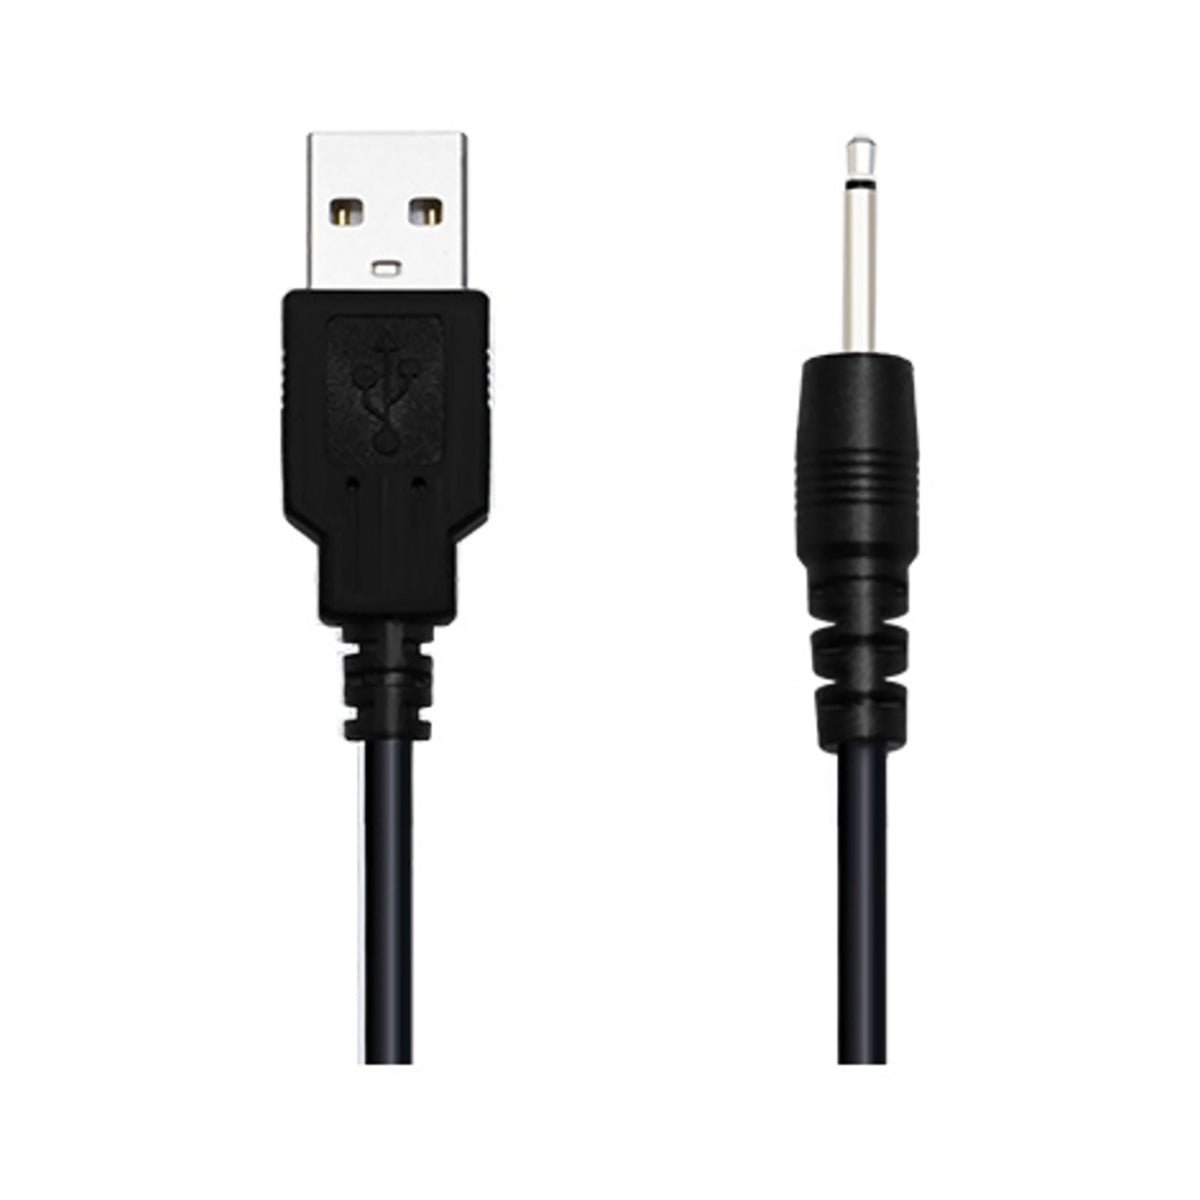 Lovense Charging Cable for Lush/Lush 2/Hush 1 Chargers